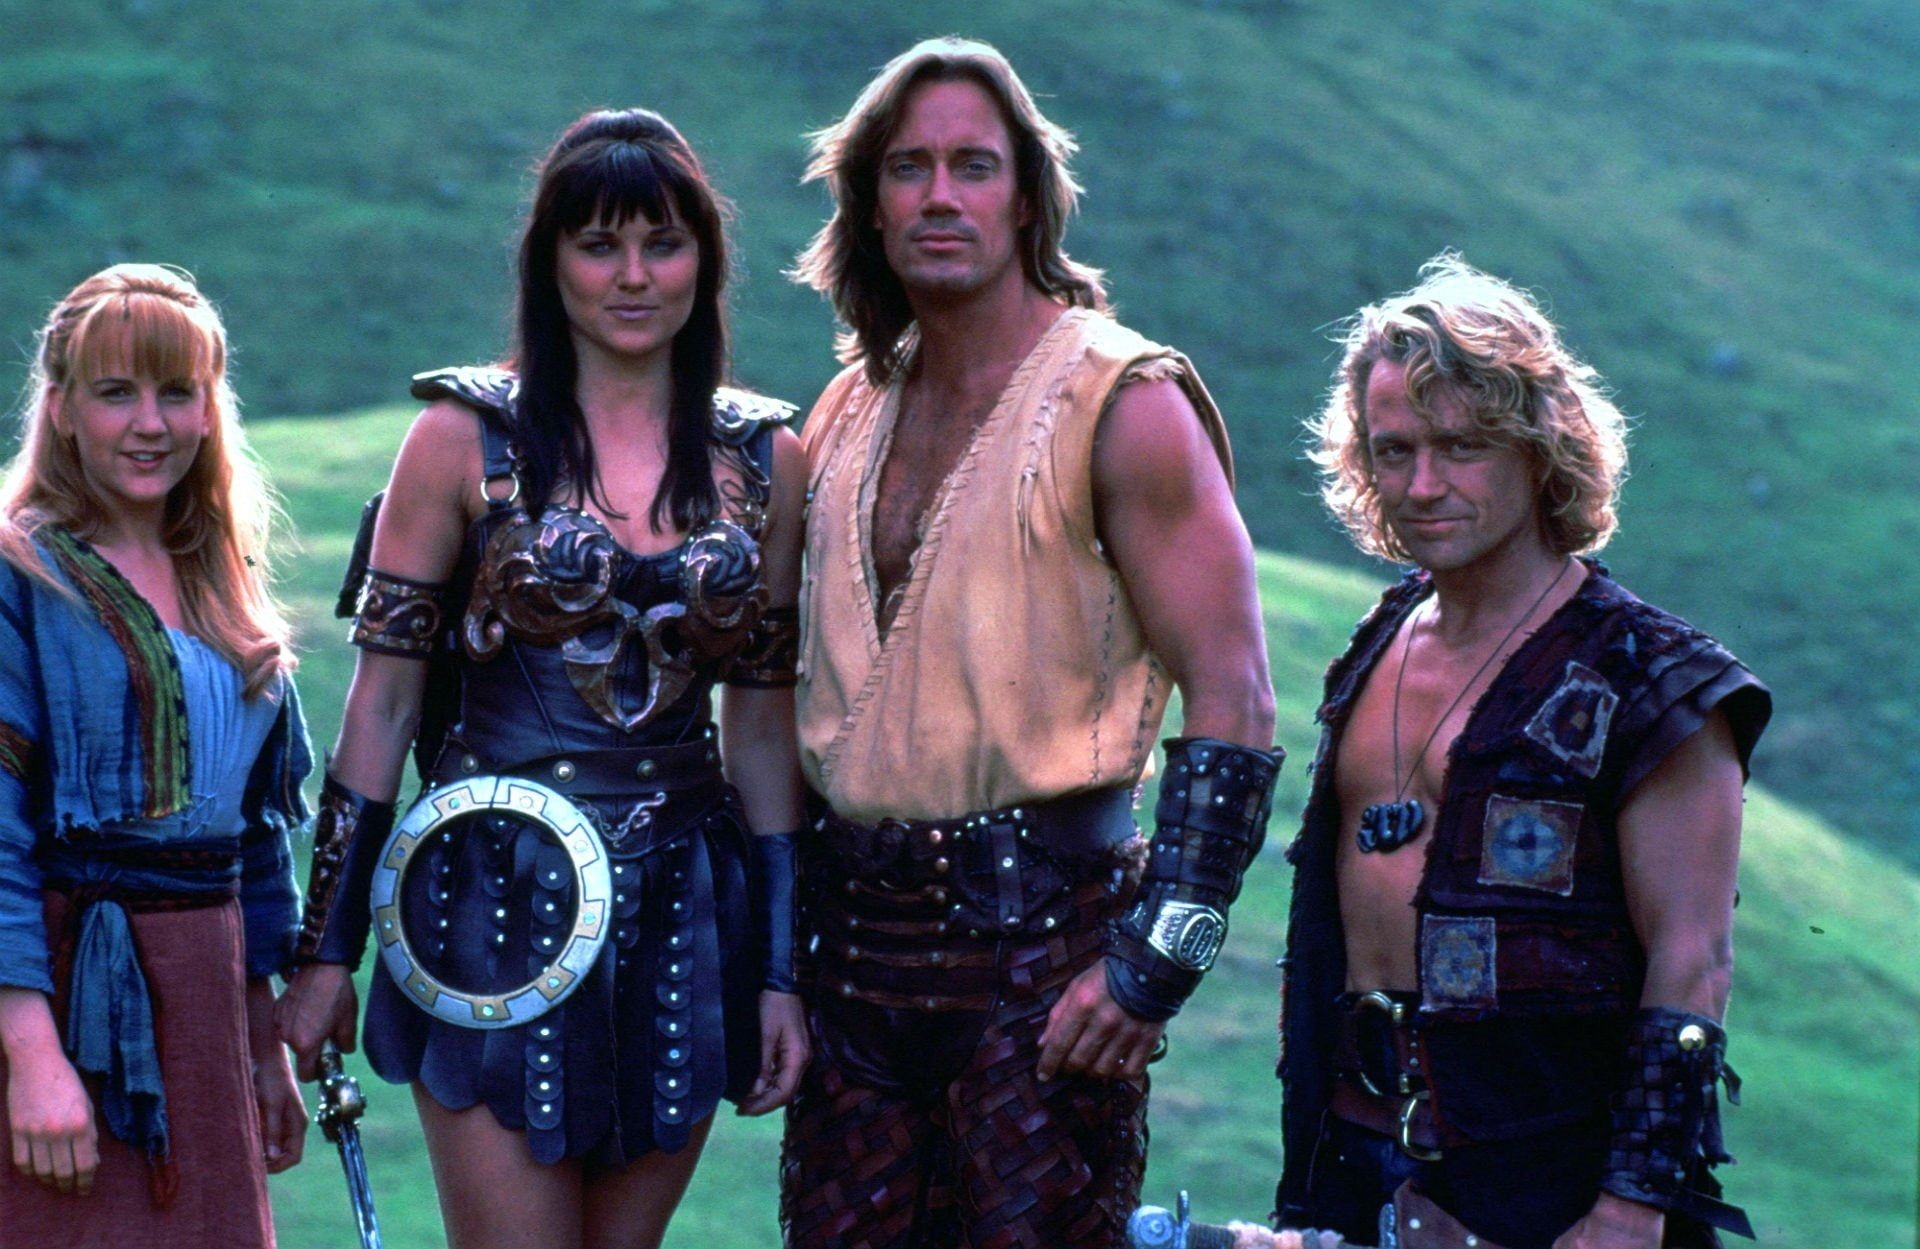 Kevin Sorbo: Xena and Hercules - One of the Best Adventure Series Crossover of 1990, John Schulian, Sam Raimi, Supernatural Action Fiction. 1920x1250 HD Wallpaper.